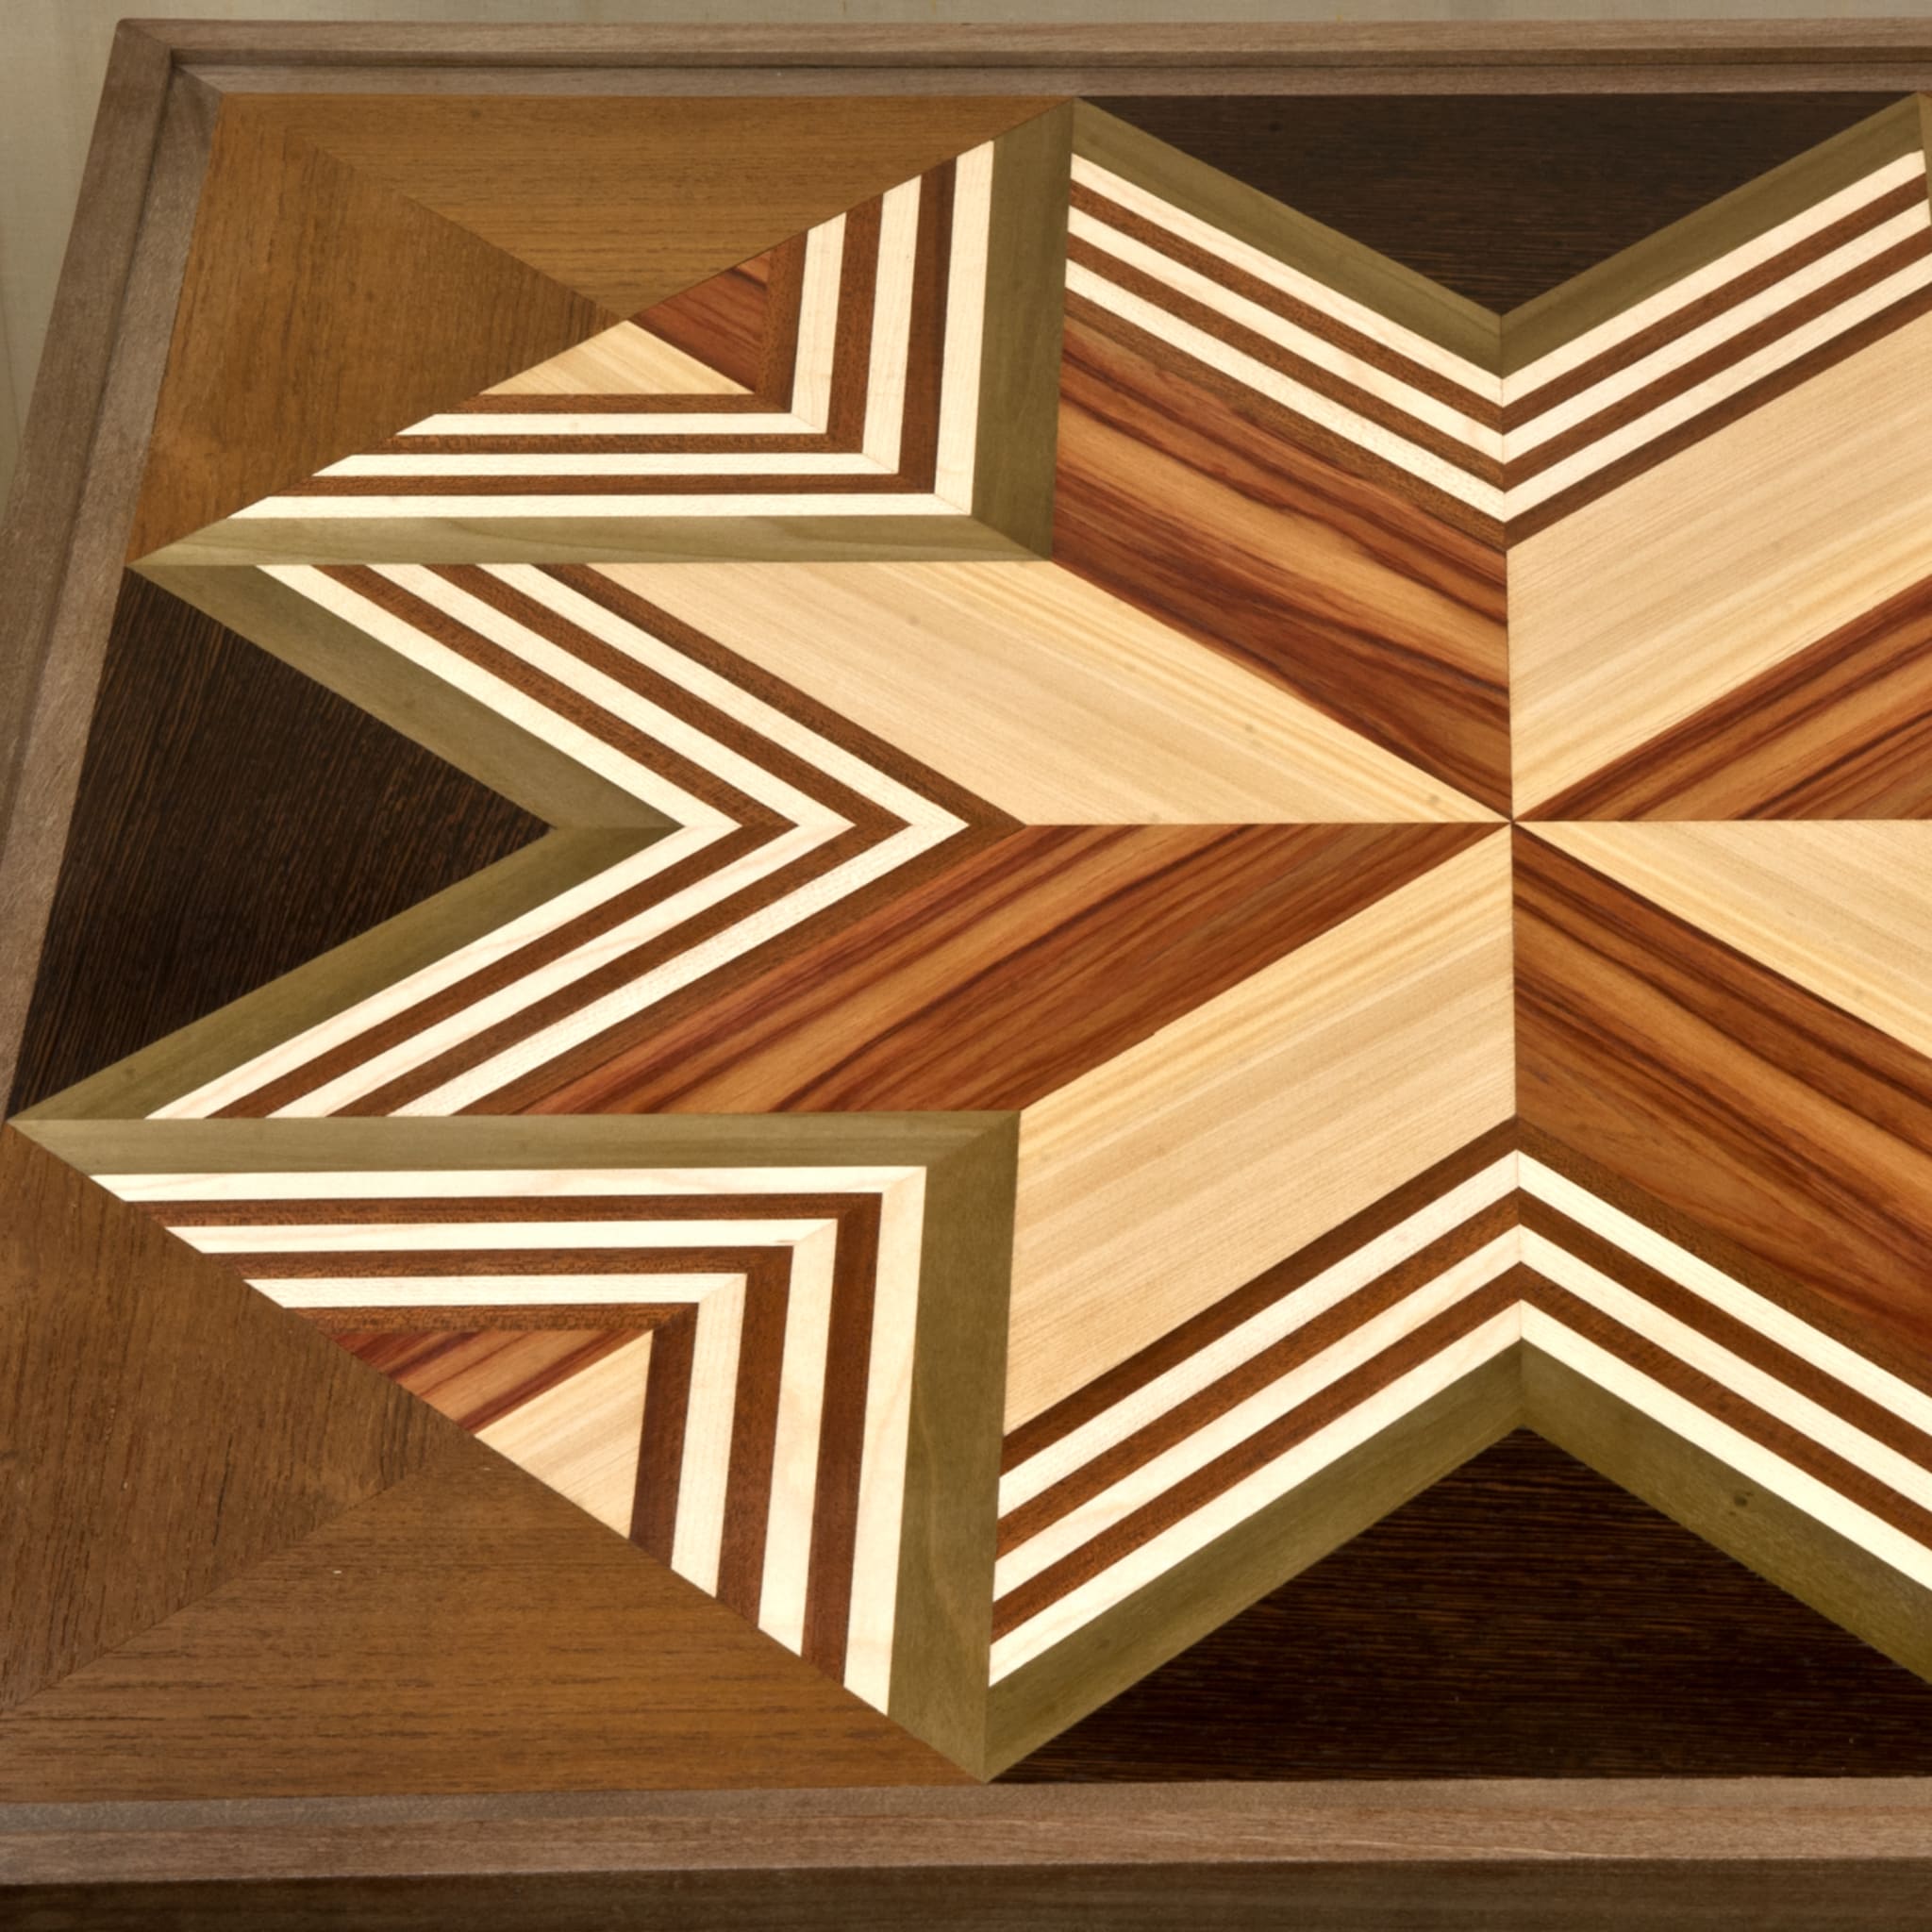 Renaissance-Style Marquetry Wheeled Coffee Table #1 - Alternative view 1